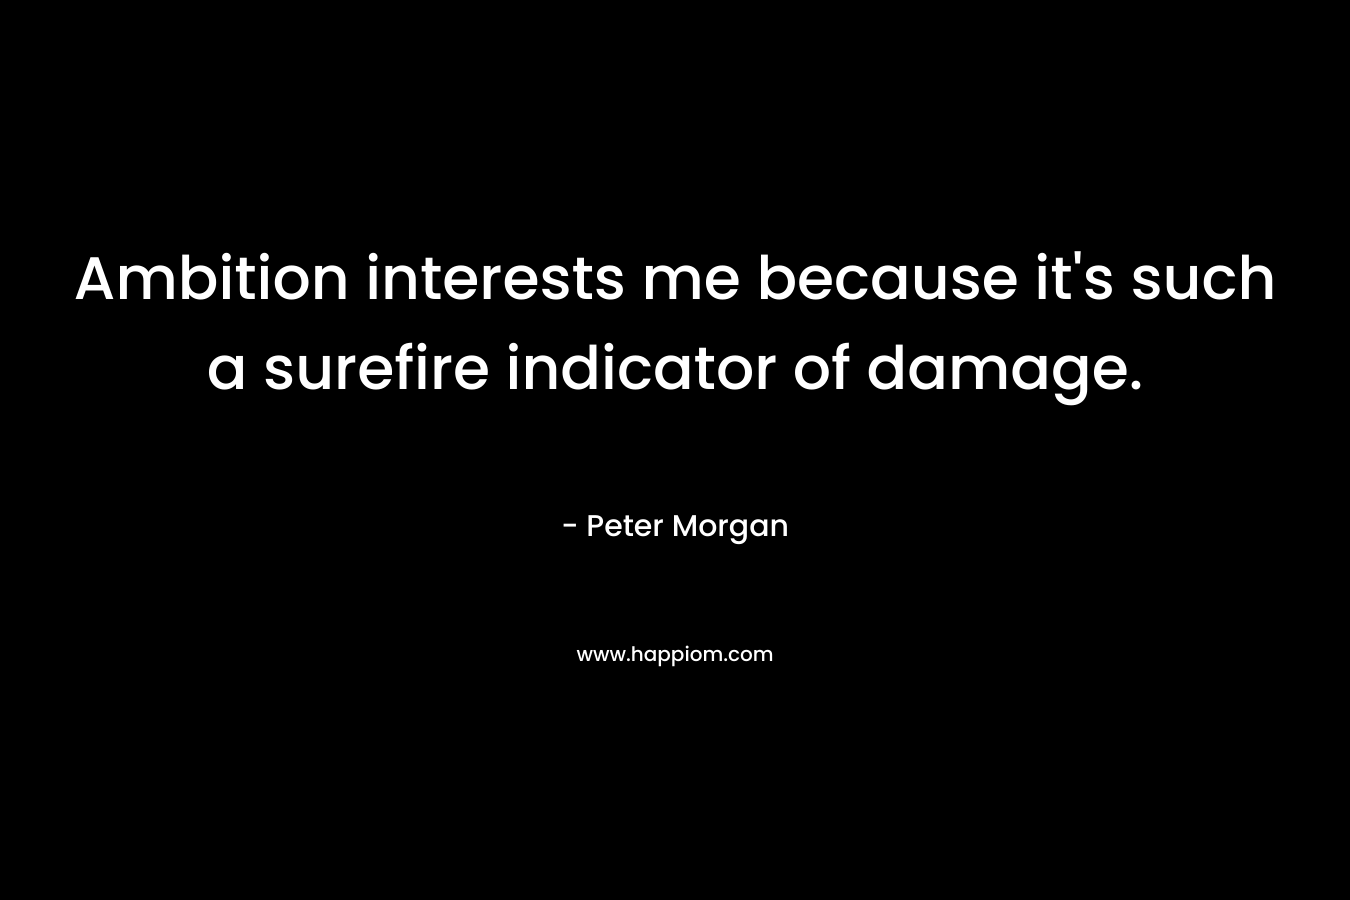 Ambition interests me because it's such a surefire indicator of damage.